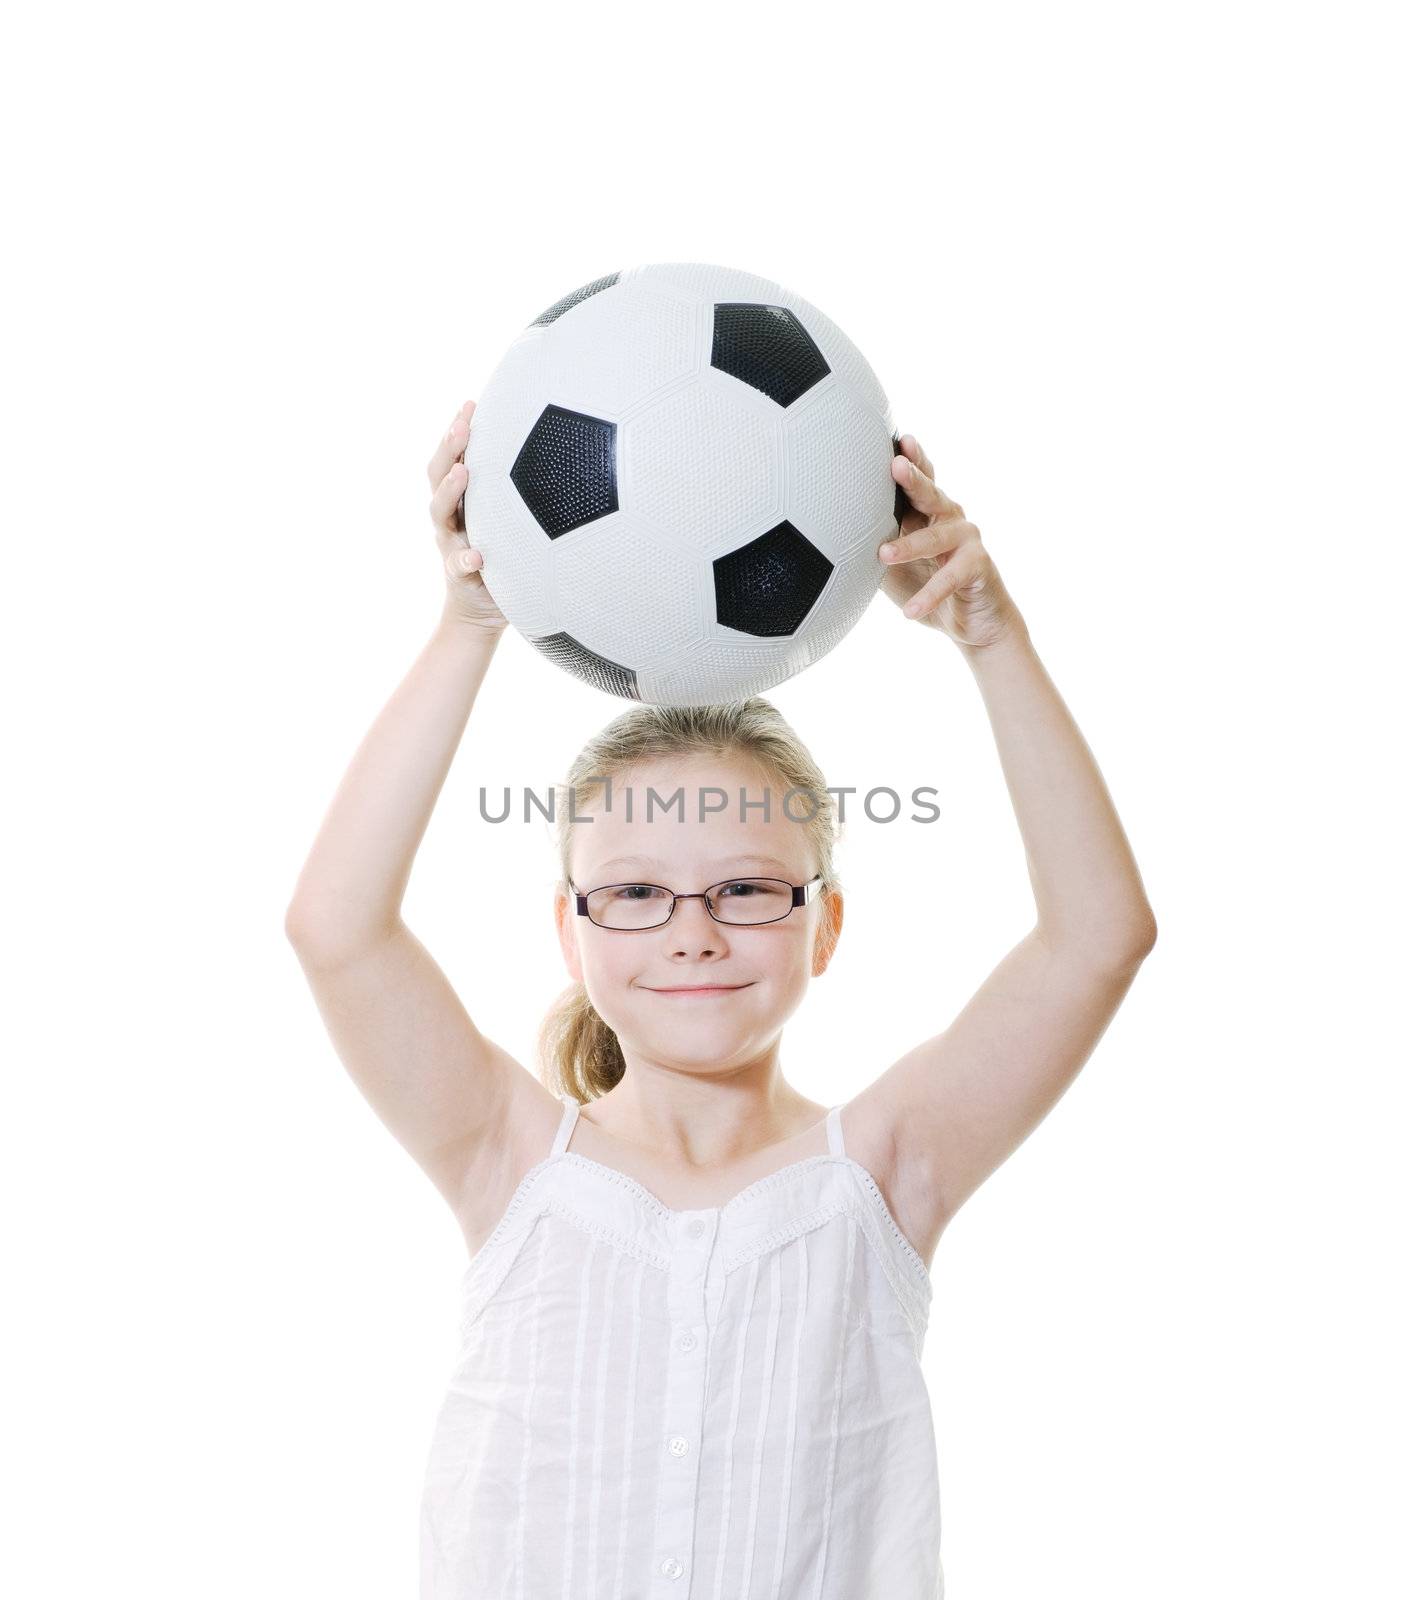 preteen girl with soccer ball held overhead isolated on white